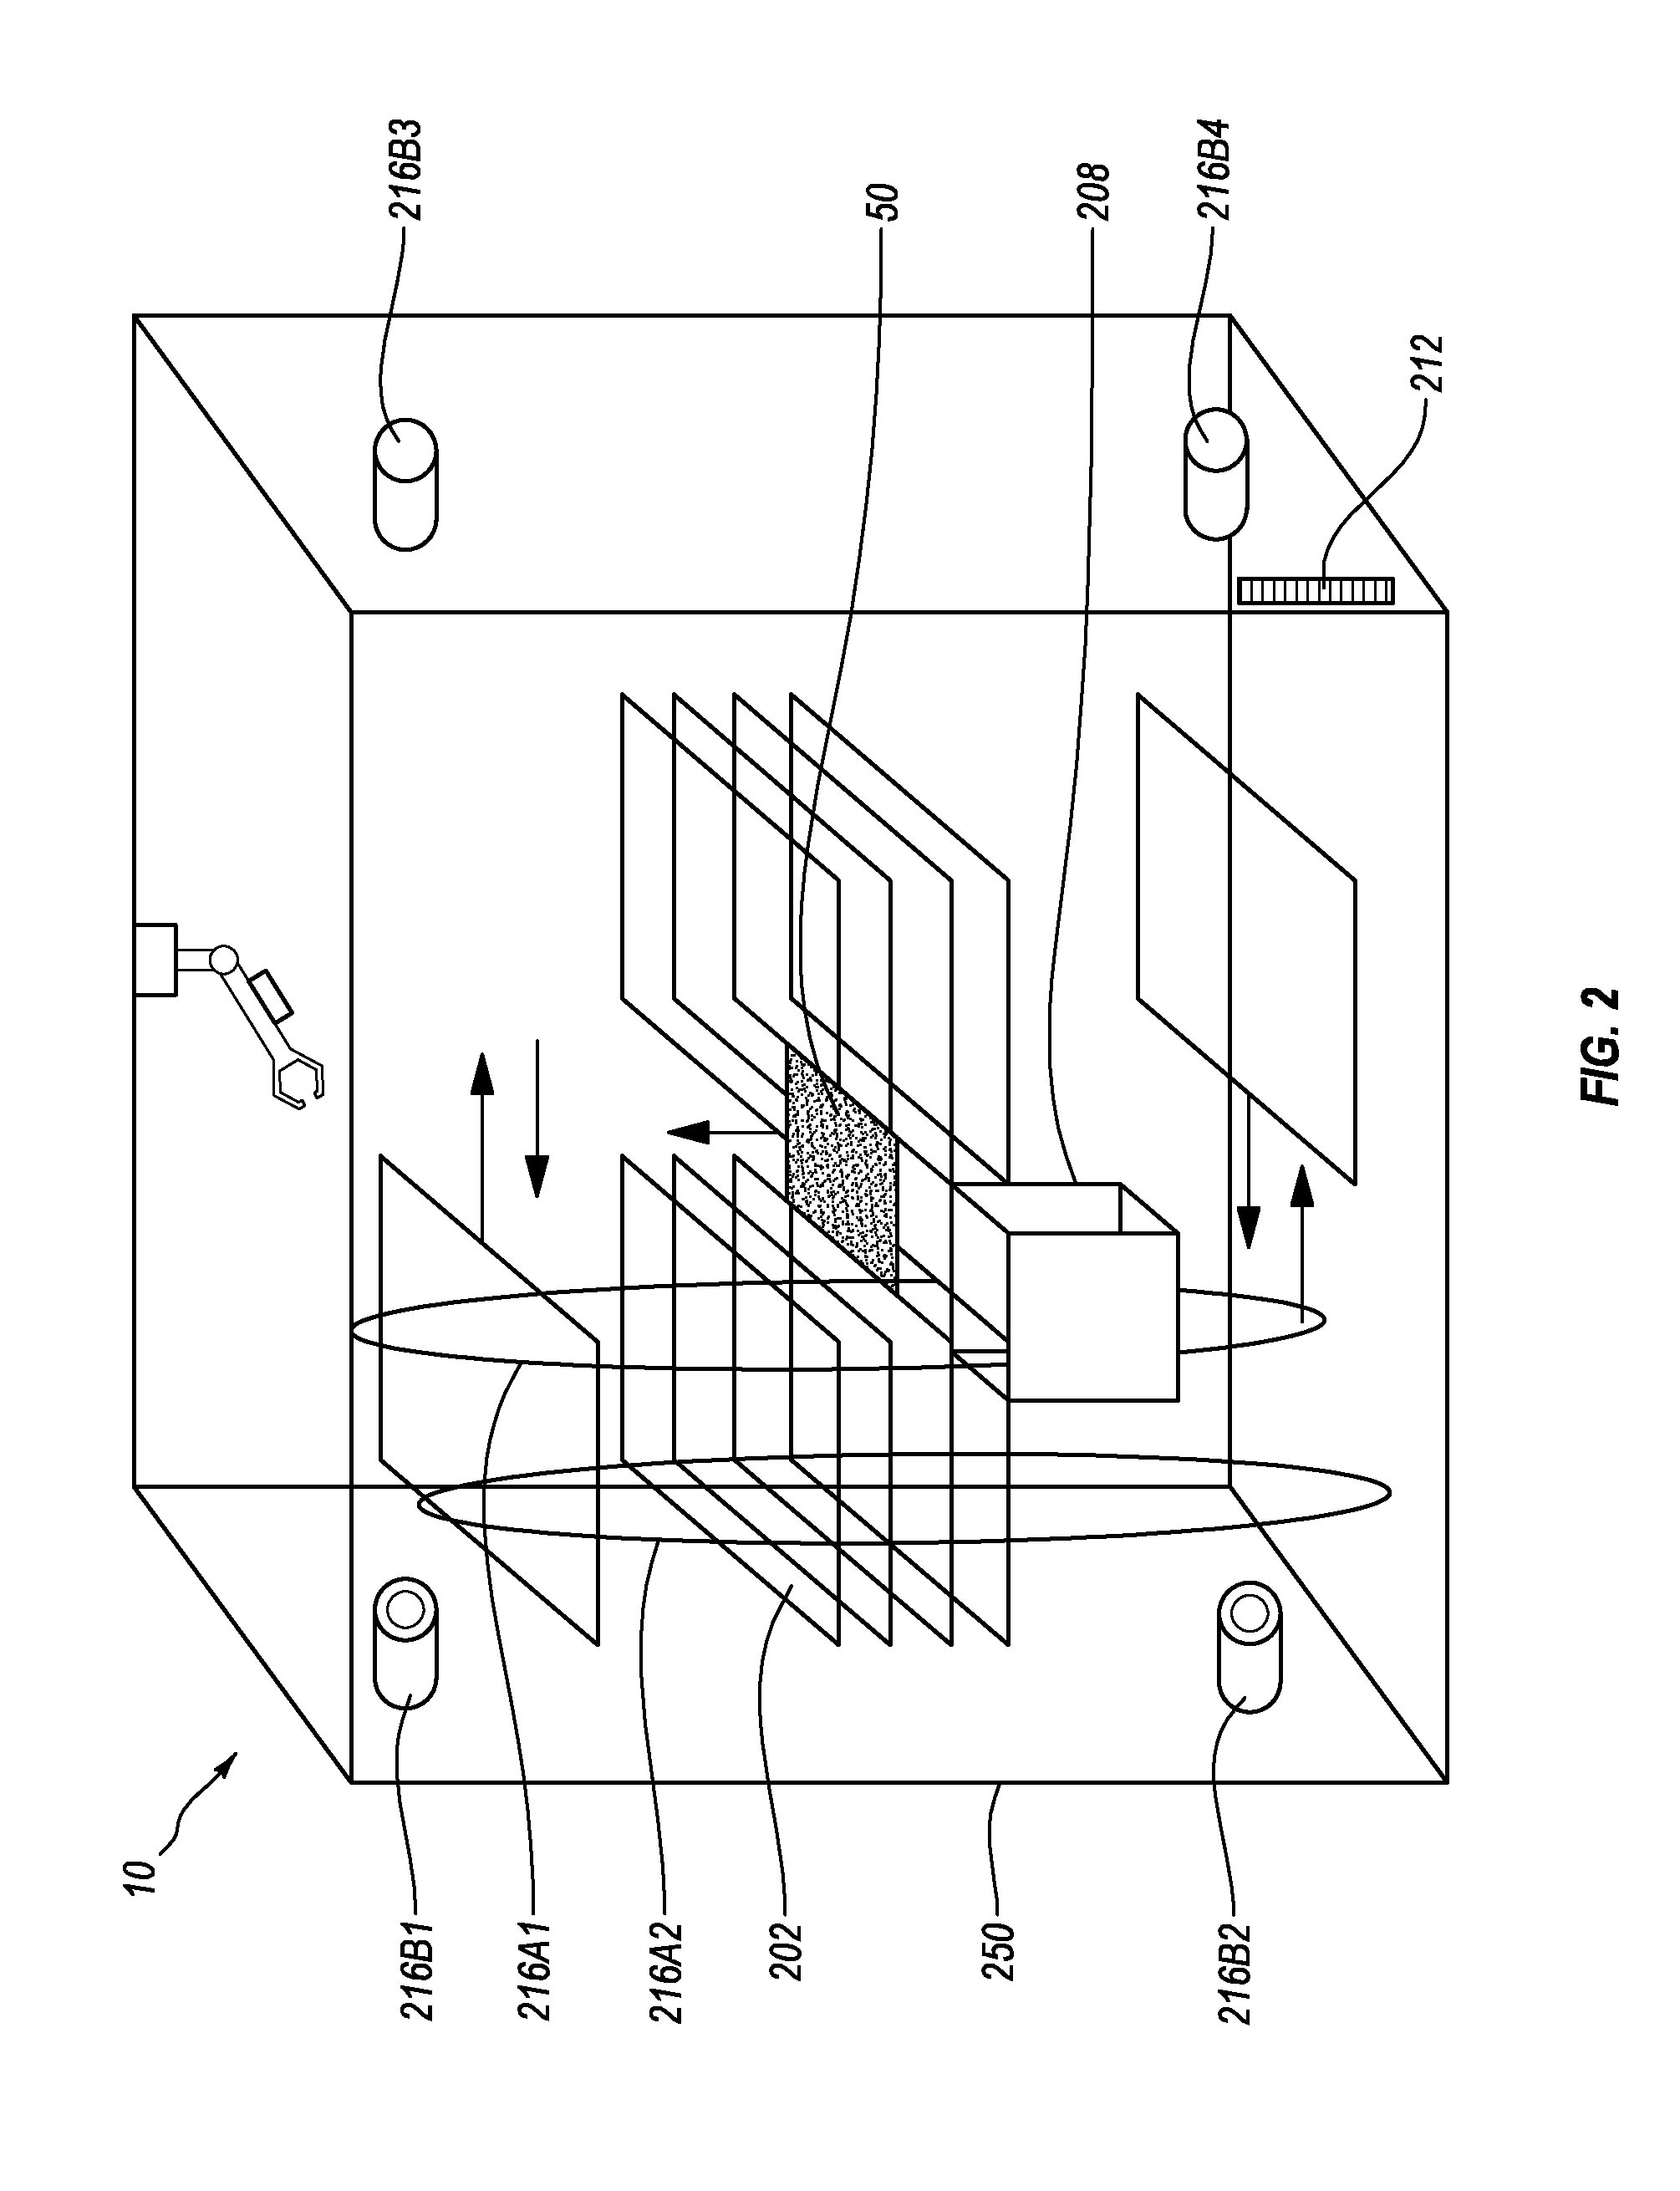 System and methods for archiving and retrieving specimens